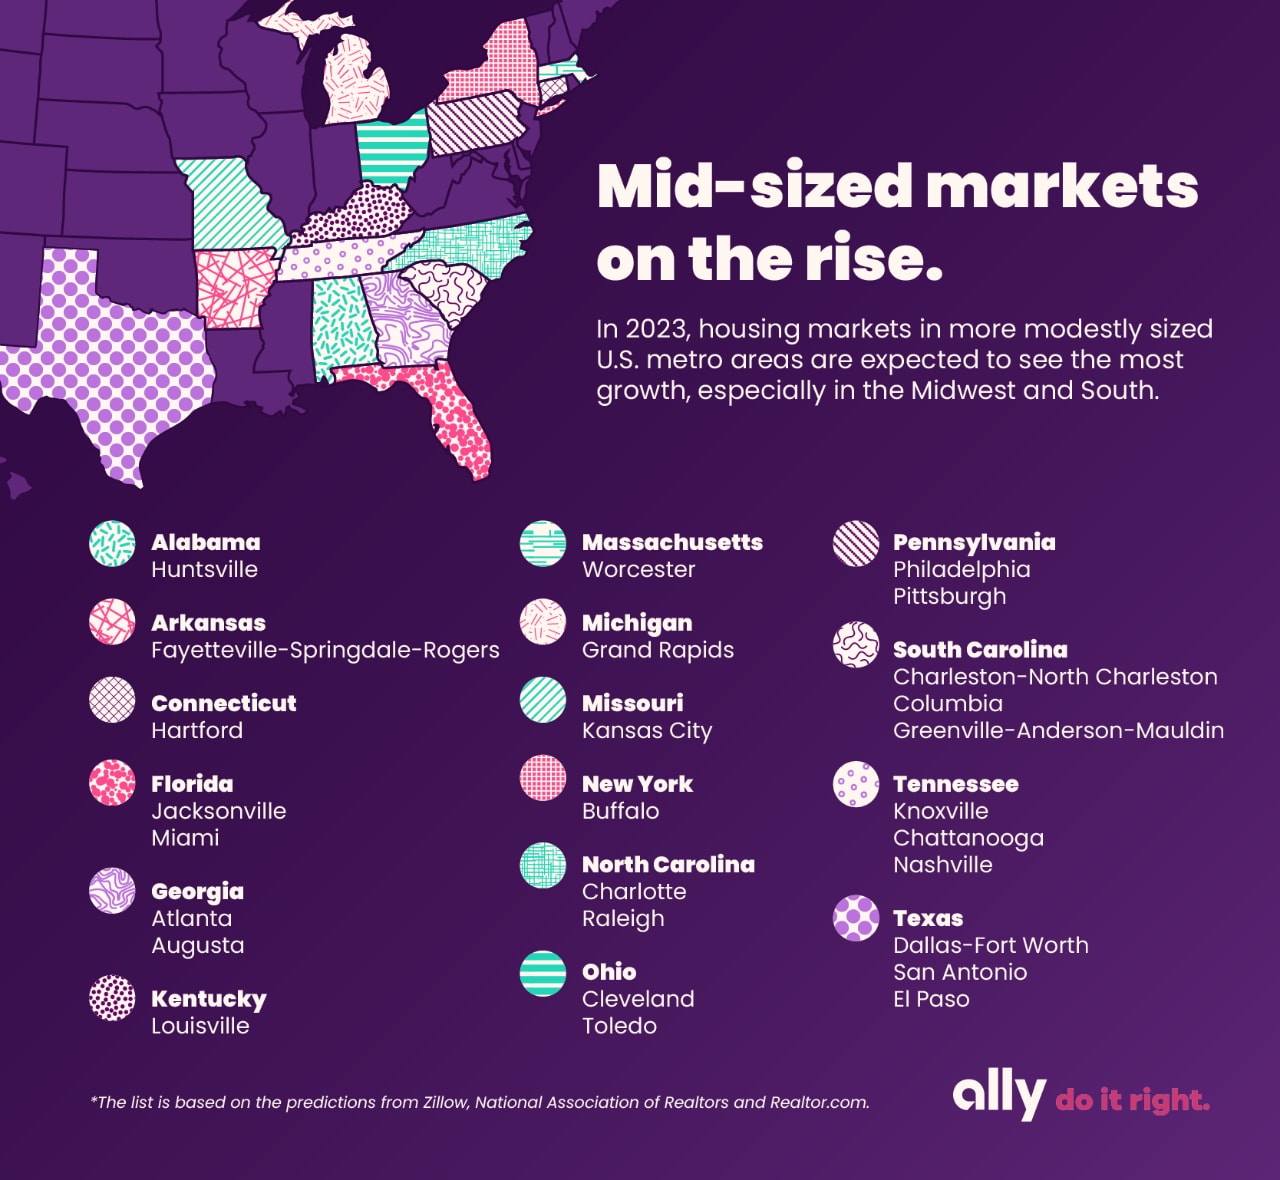 Graphic with title, “Mid-sized markets on the rise.” Picture on graphic shows the eastern half of the United States. Words on graphic are as follows: In 2023, housing markets in more modestly sized U.S. metro areas are expected to see the most growth, especially in the Midwest and South. Huntsville, Alabama. Fayetteville-Springdale-Rogers, Arkansas. Hartford, Connecticut. Jacksonville, Miami, Florida. Atlanta, Augusta, Georgia. Louisville, Kentucky. Worcester, Massachusetts. Grand Rapids, Michigan. Kansas City, Missouri. Buffalo, New York. Charlotte, Raleigh, North Carolina. Cleveland, Toledo, Ohio. Philadelphia, Pittsburgh, Pennsylvania. Charleston-North Charleston, Columbia, Greenville-Anderson-Mauldin, South Carolina. Knoxville, Chattanooga, Nashville, Tennessee. Dallas-Fort Worth, San Antonio, El Paso, Texas. The list is based on the predictions from Zillow, National Association of Realtors and Realtor.com. Ally do it right.